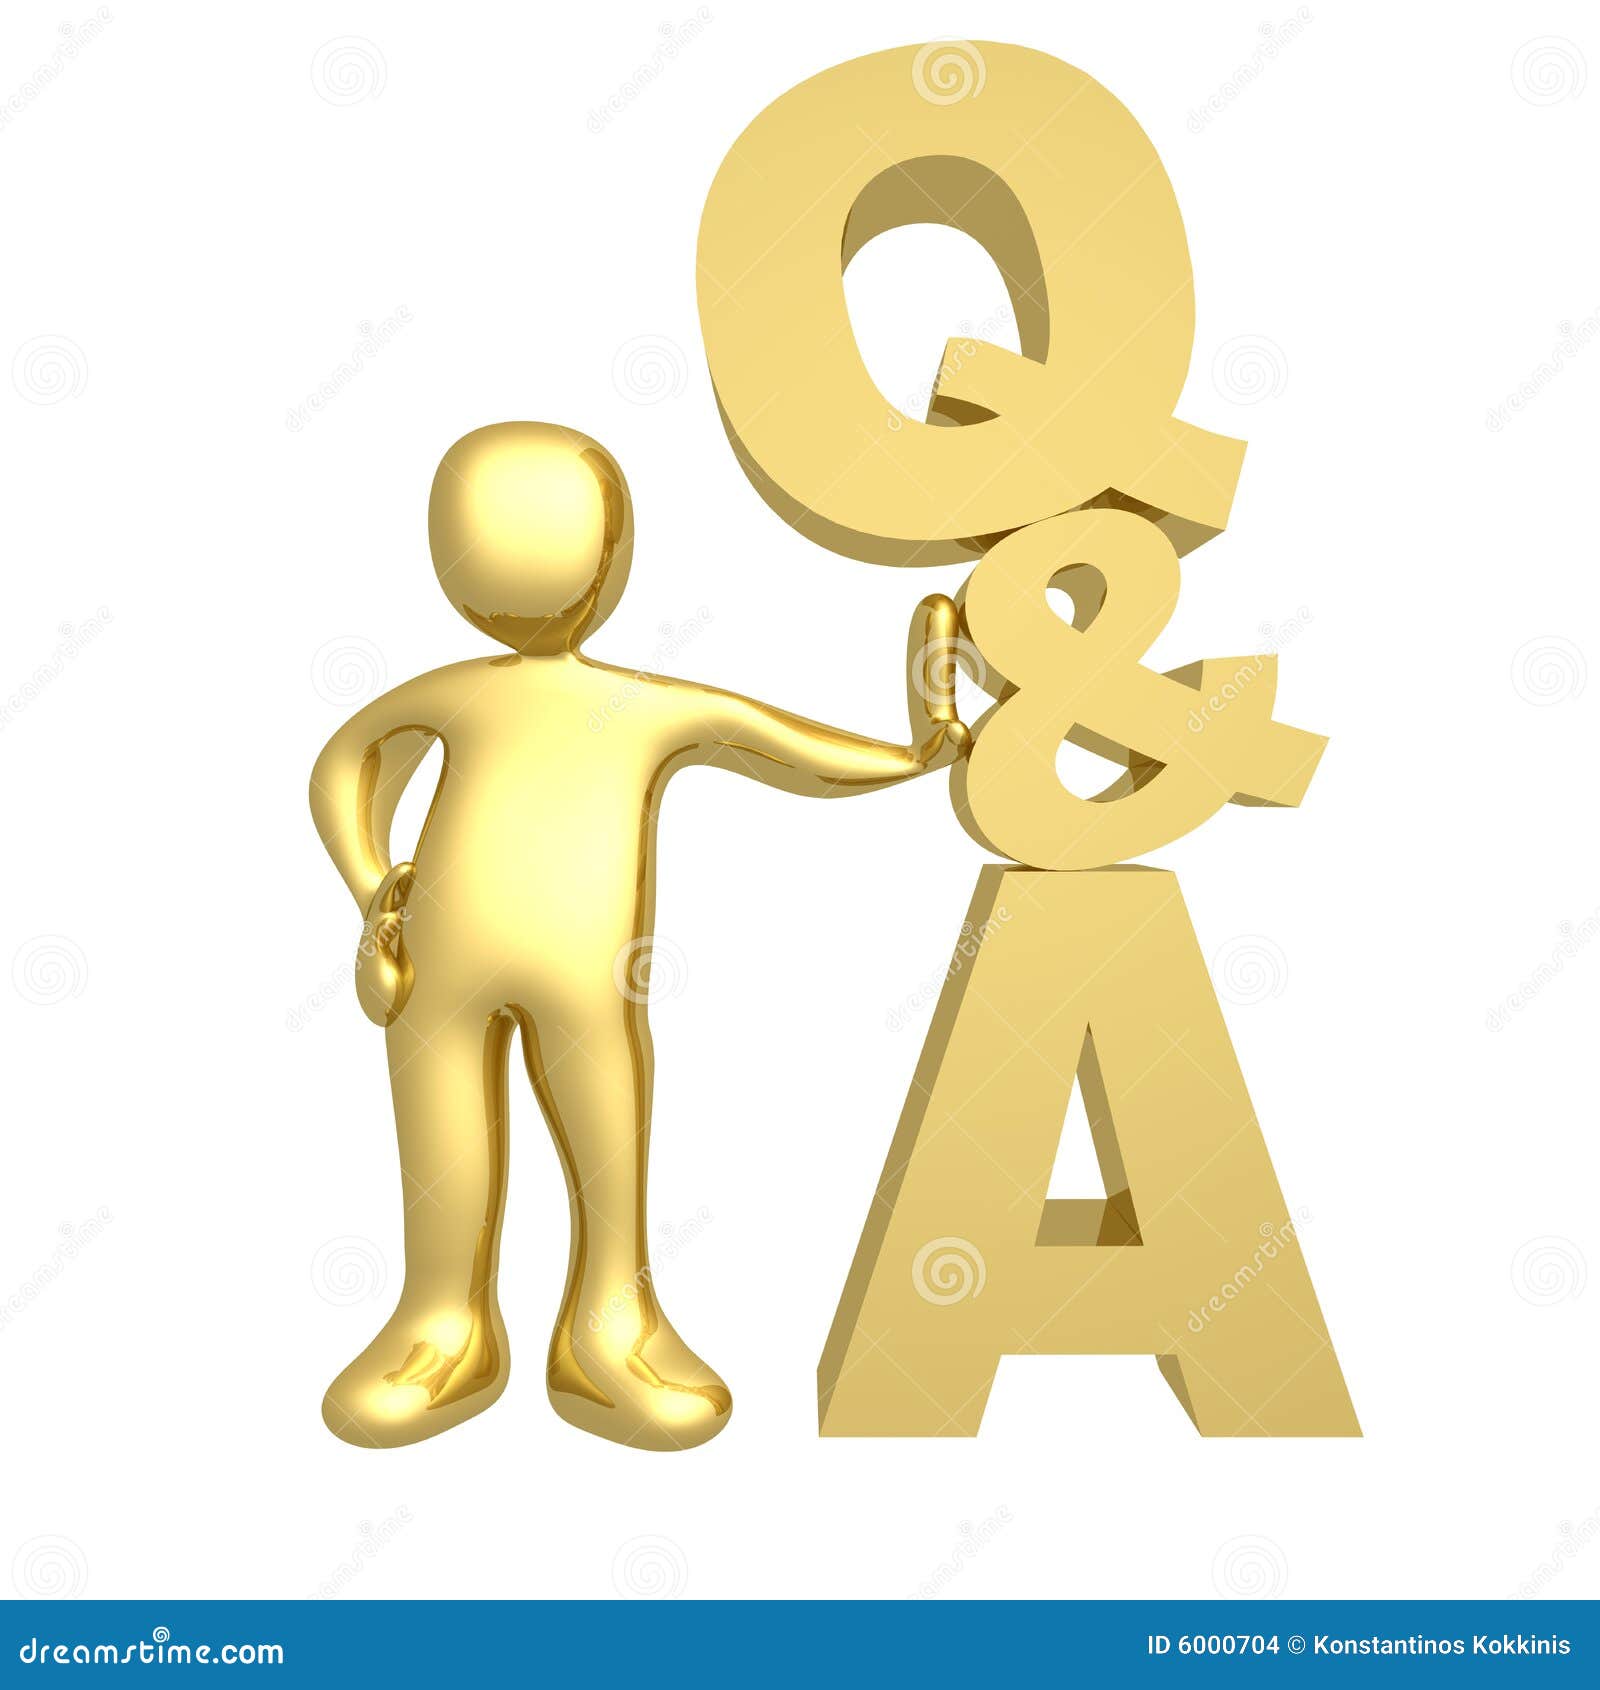 clipart for questions and answers - photo #28